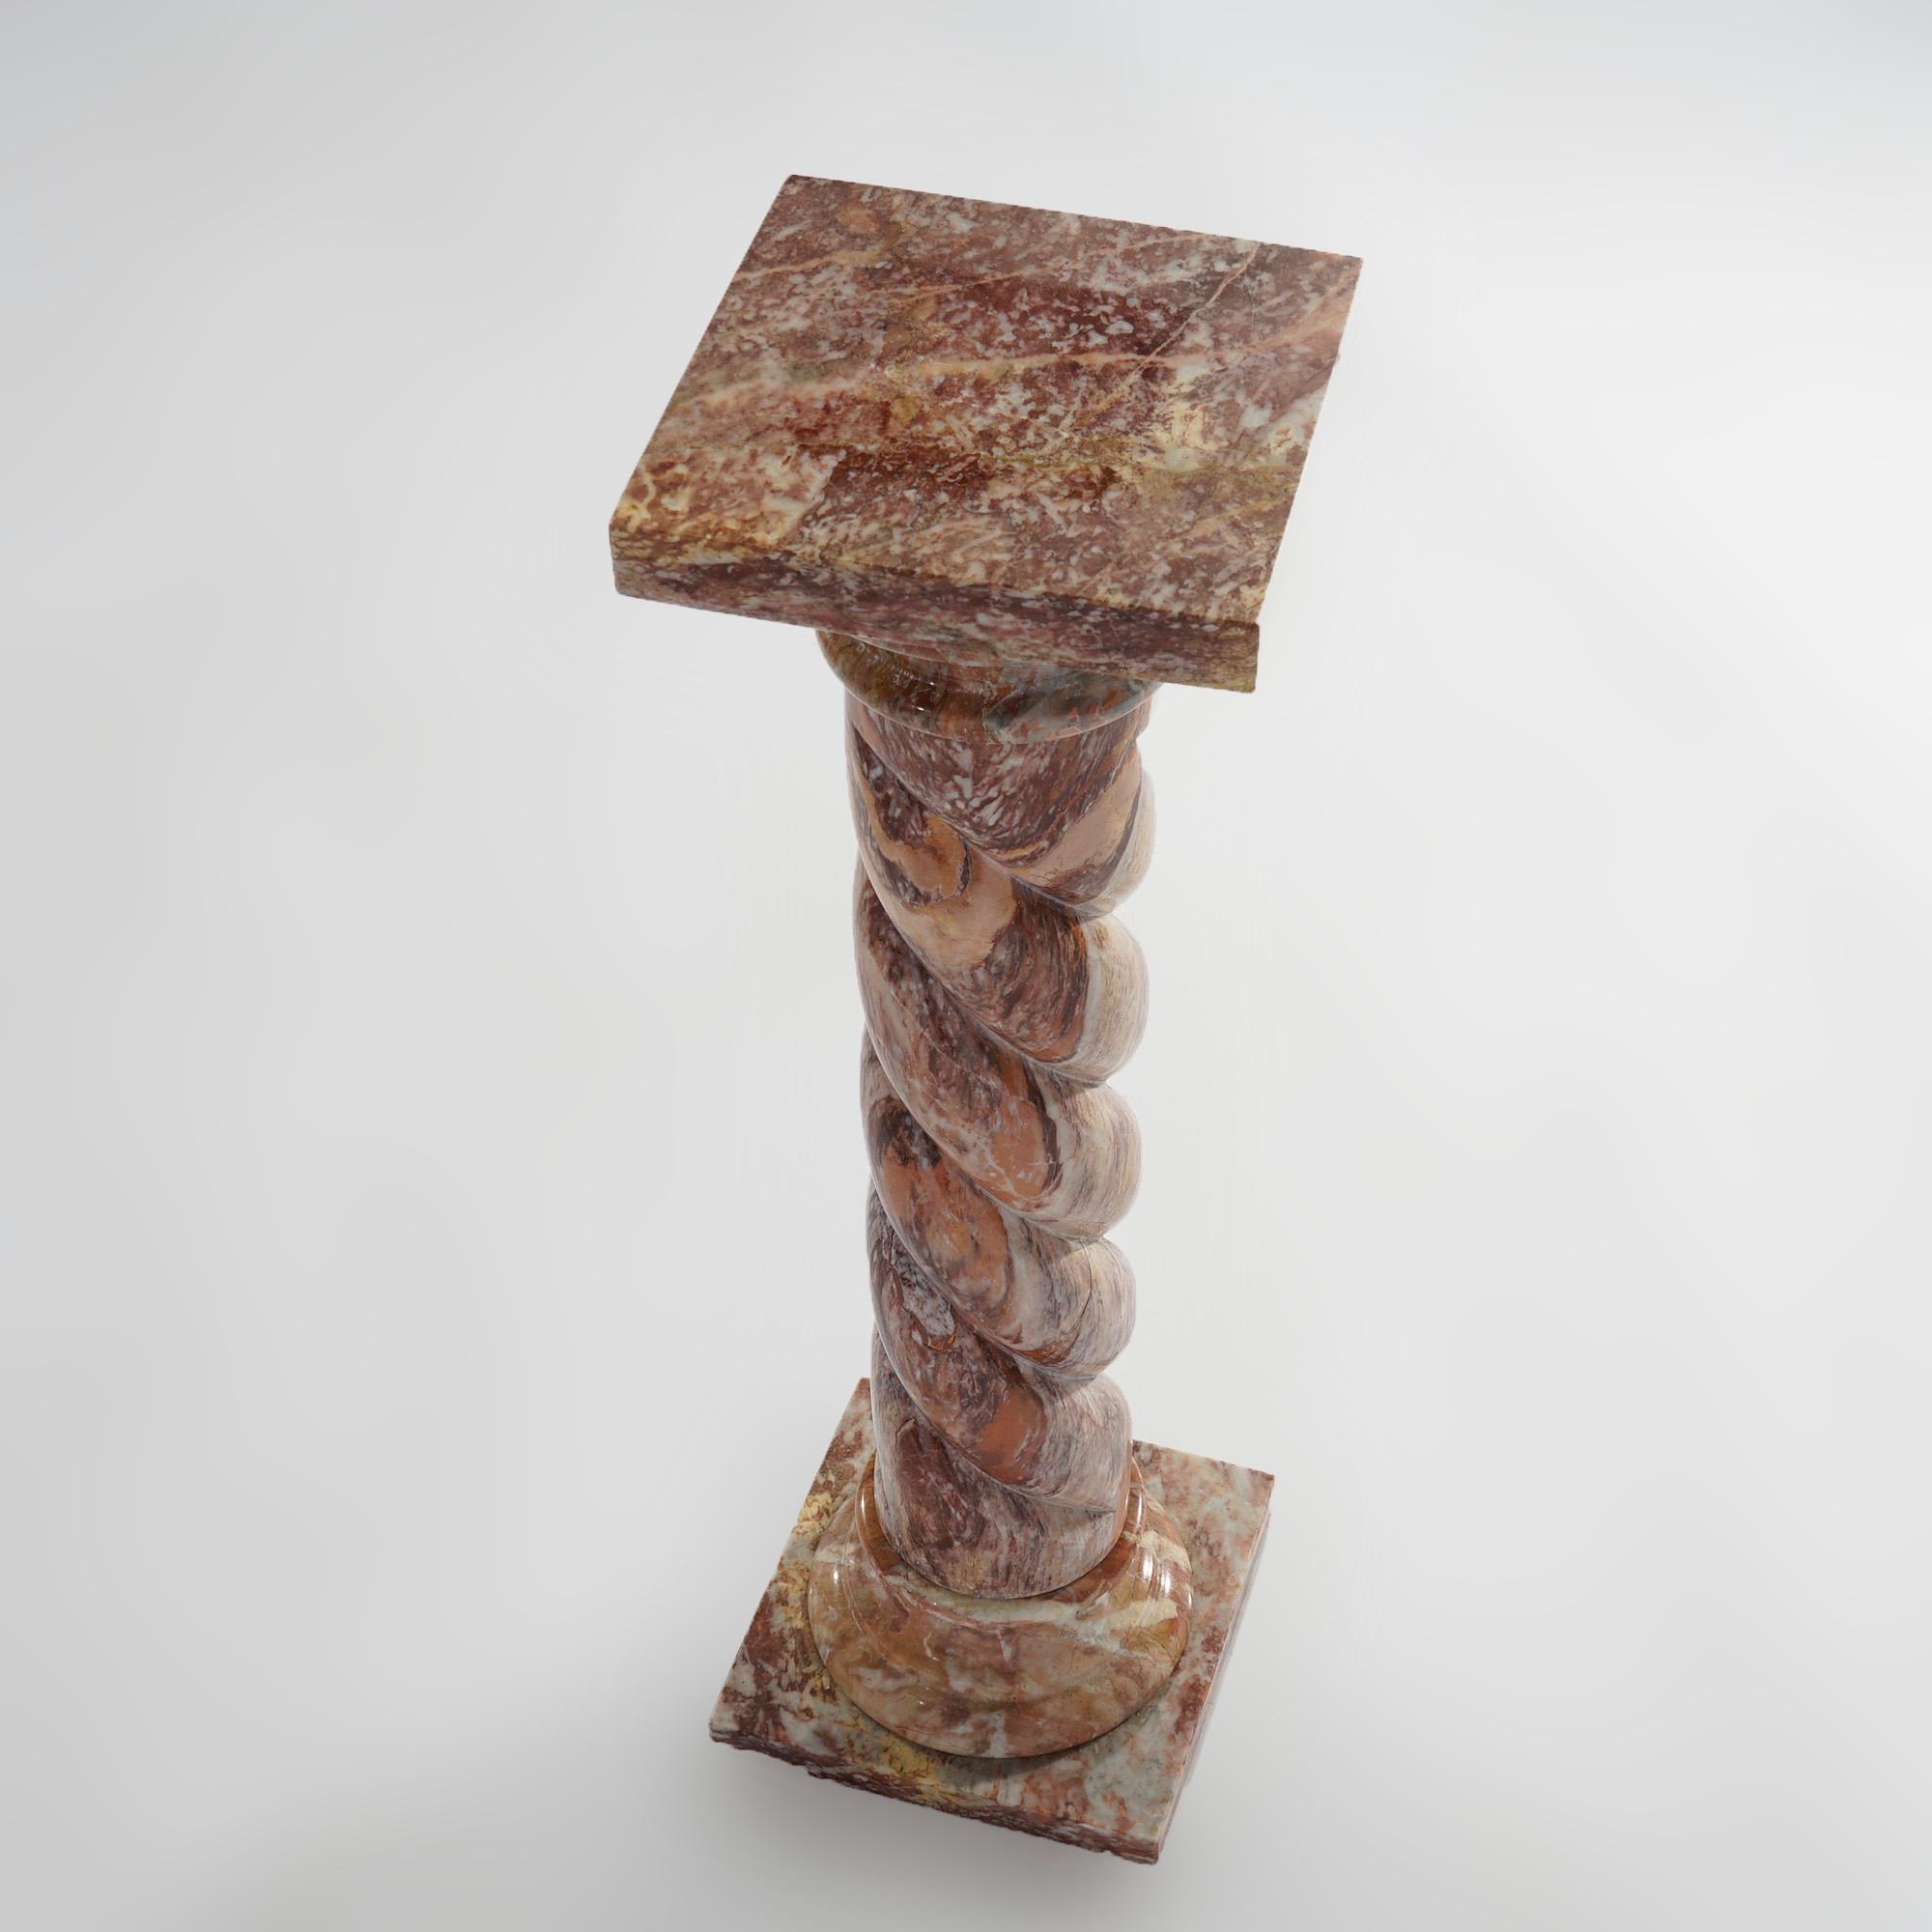 Carved Antique Italian Rouge Marble Rope-Twist Sculpture Display Pedestal, Circa 1920